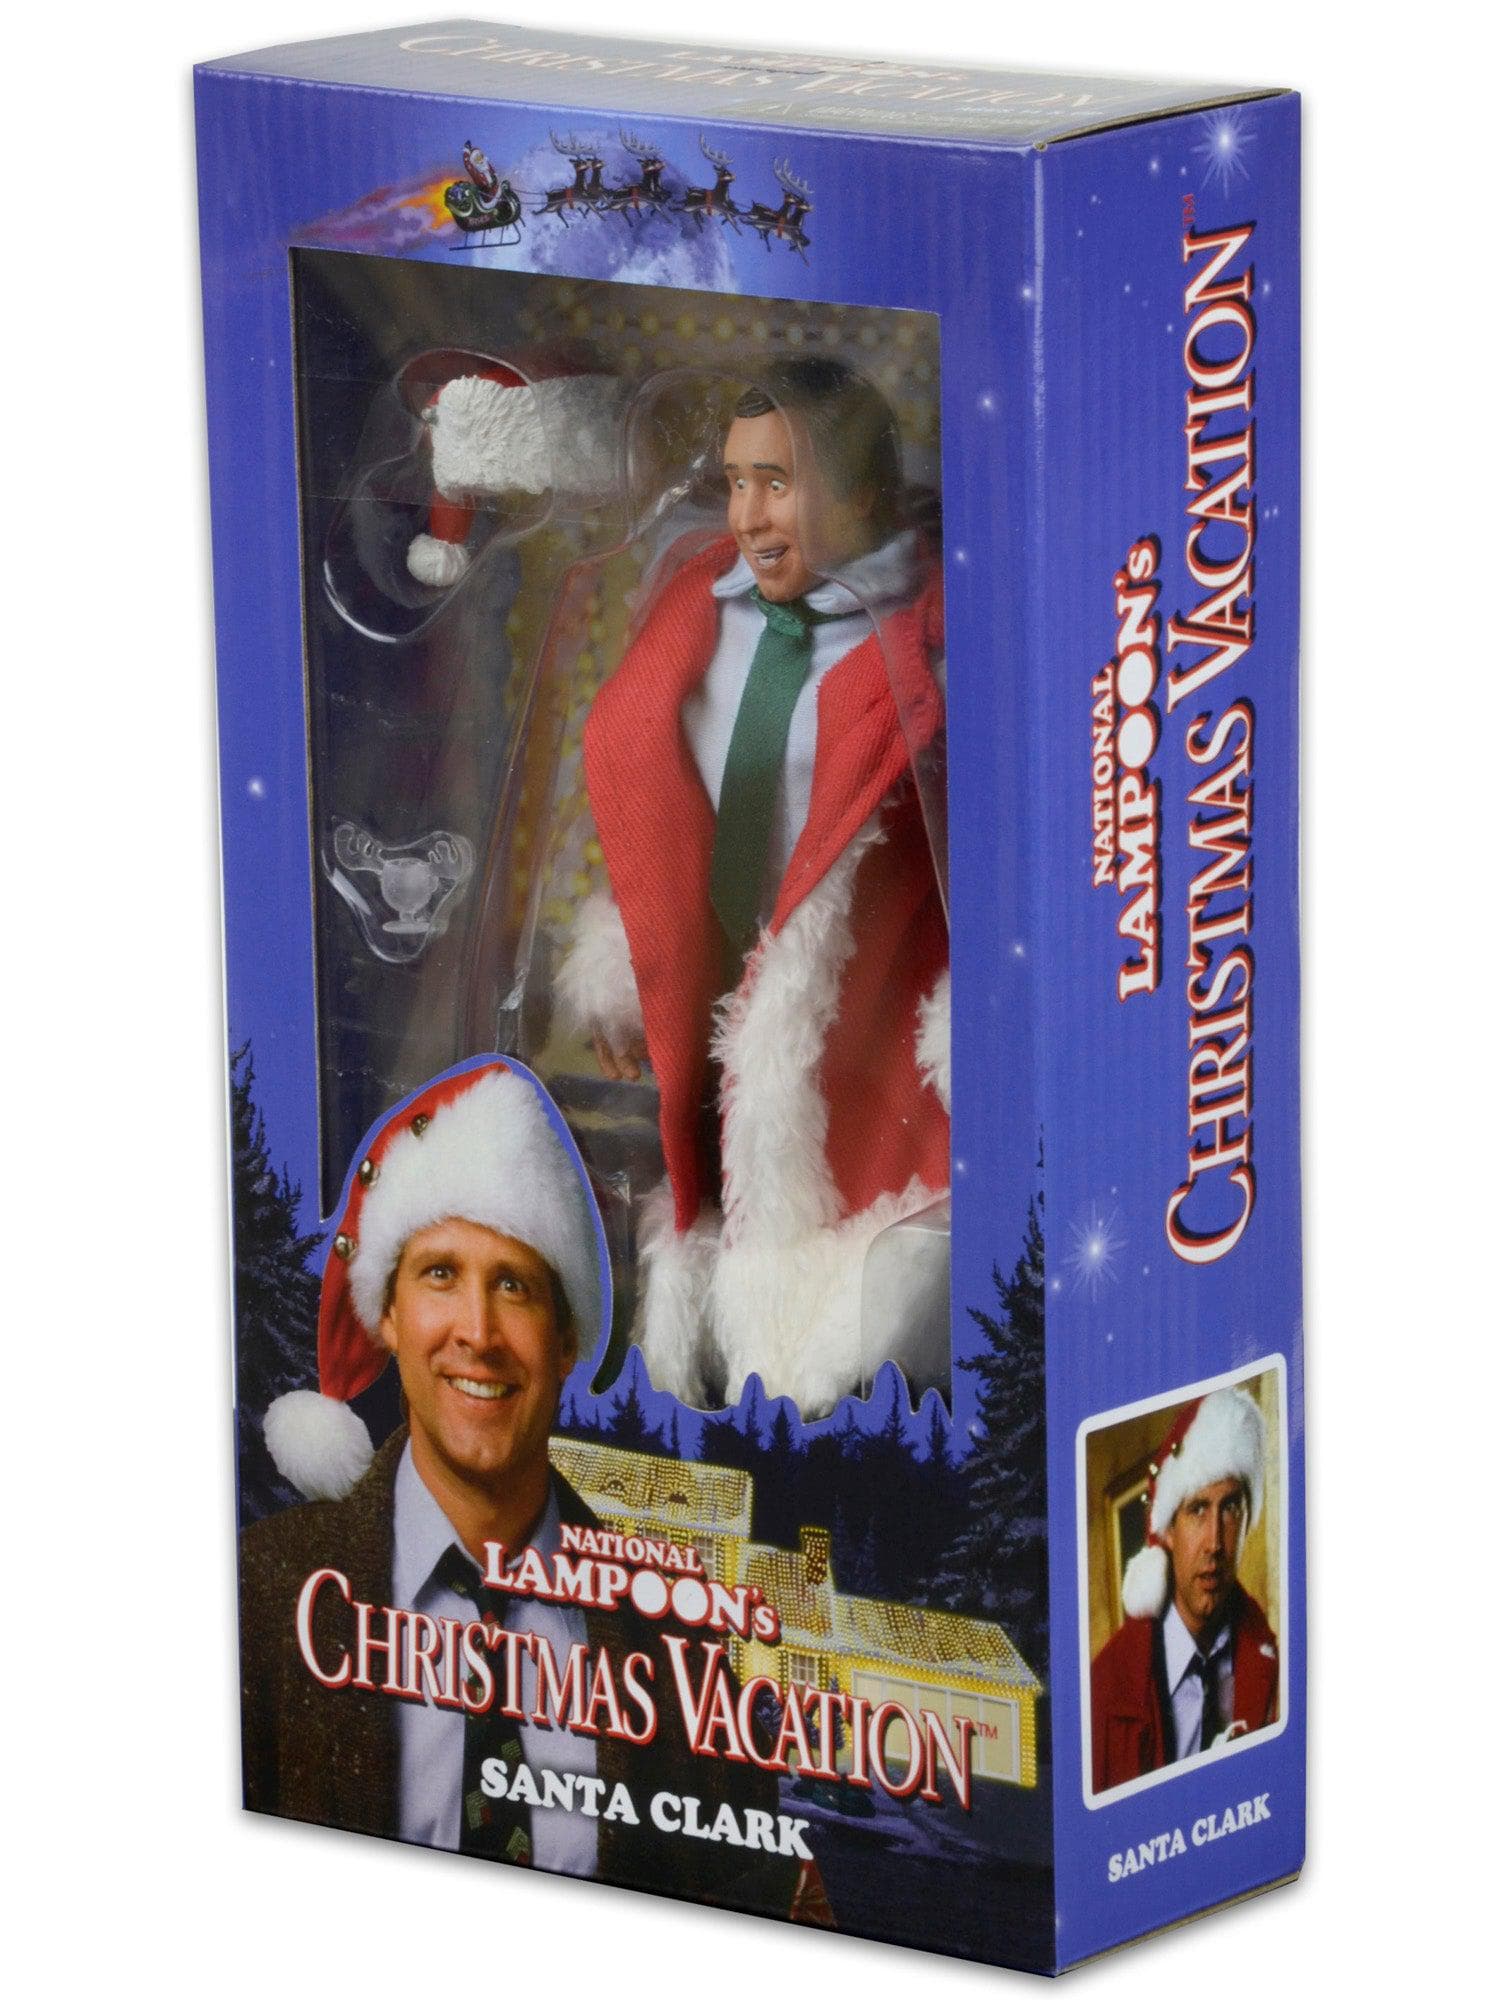 NECA - National Lampoon's Christmas Vacation - 8" Clothed Action Figure - Santa Clark - costumes.com